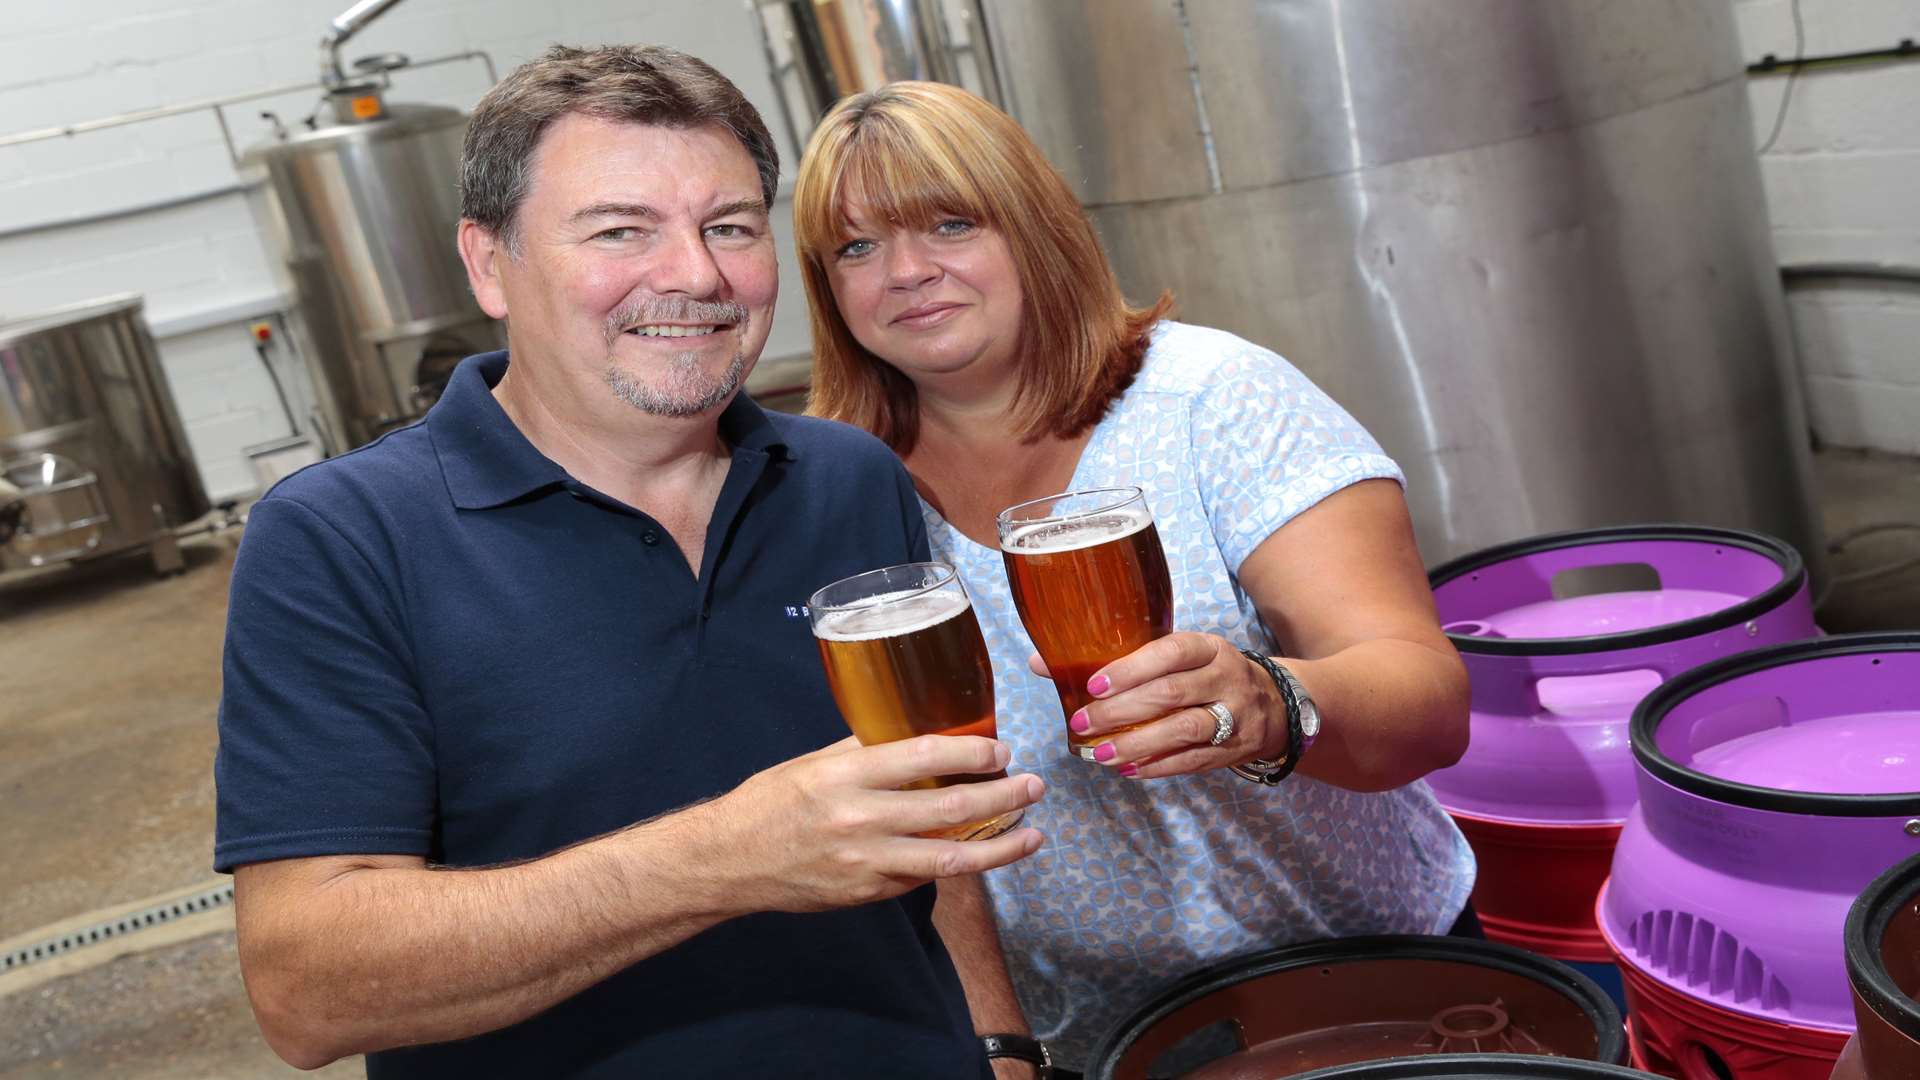 Europe has a growing thirst for UK beers, like the ones made by 12 Bar Brewing Company in Marden